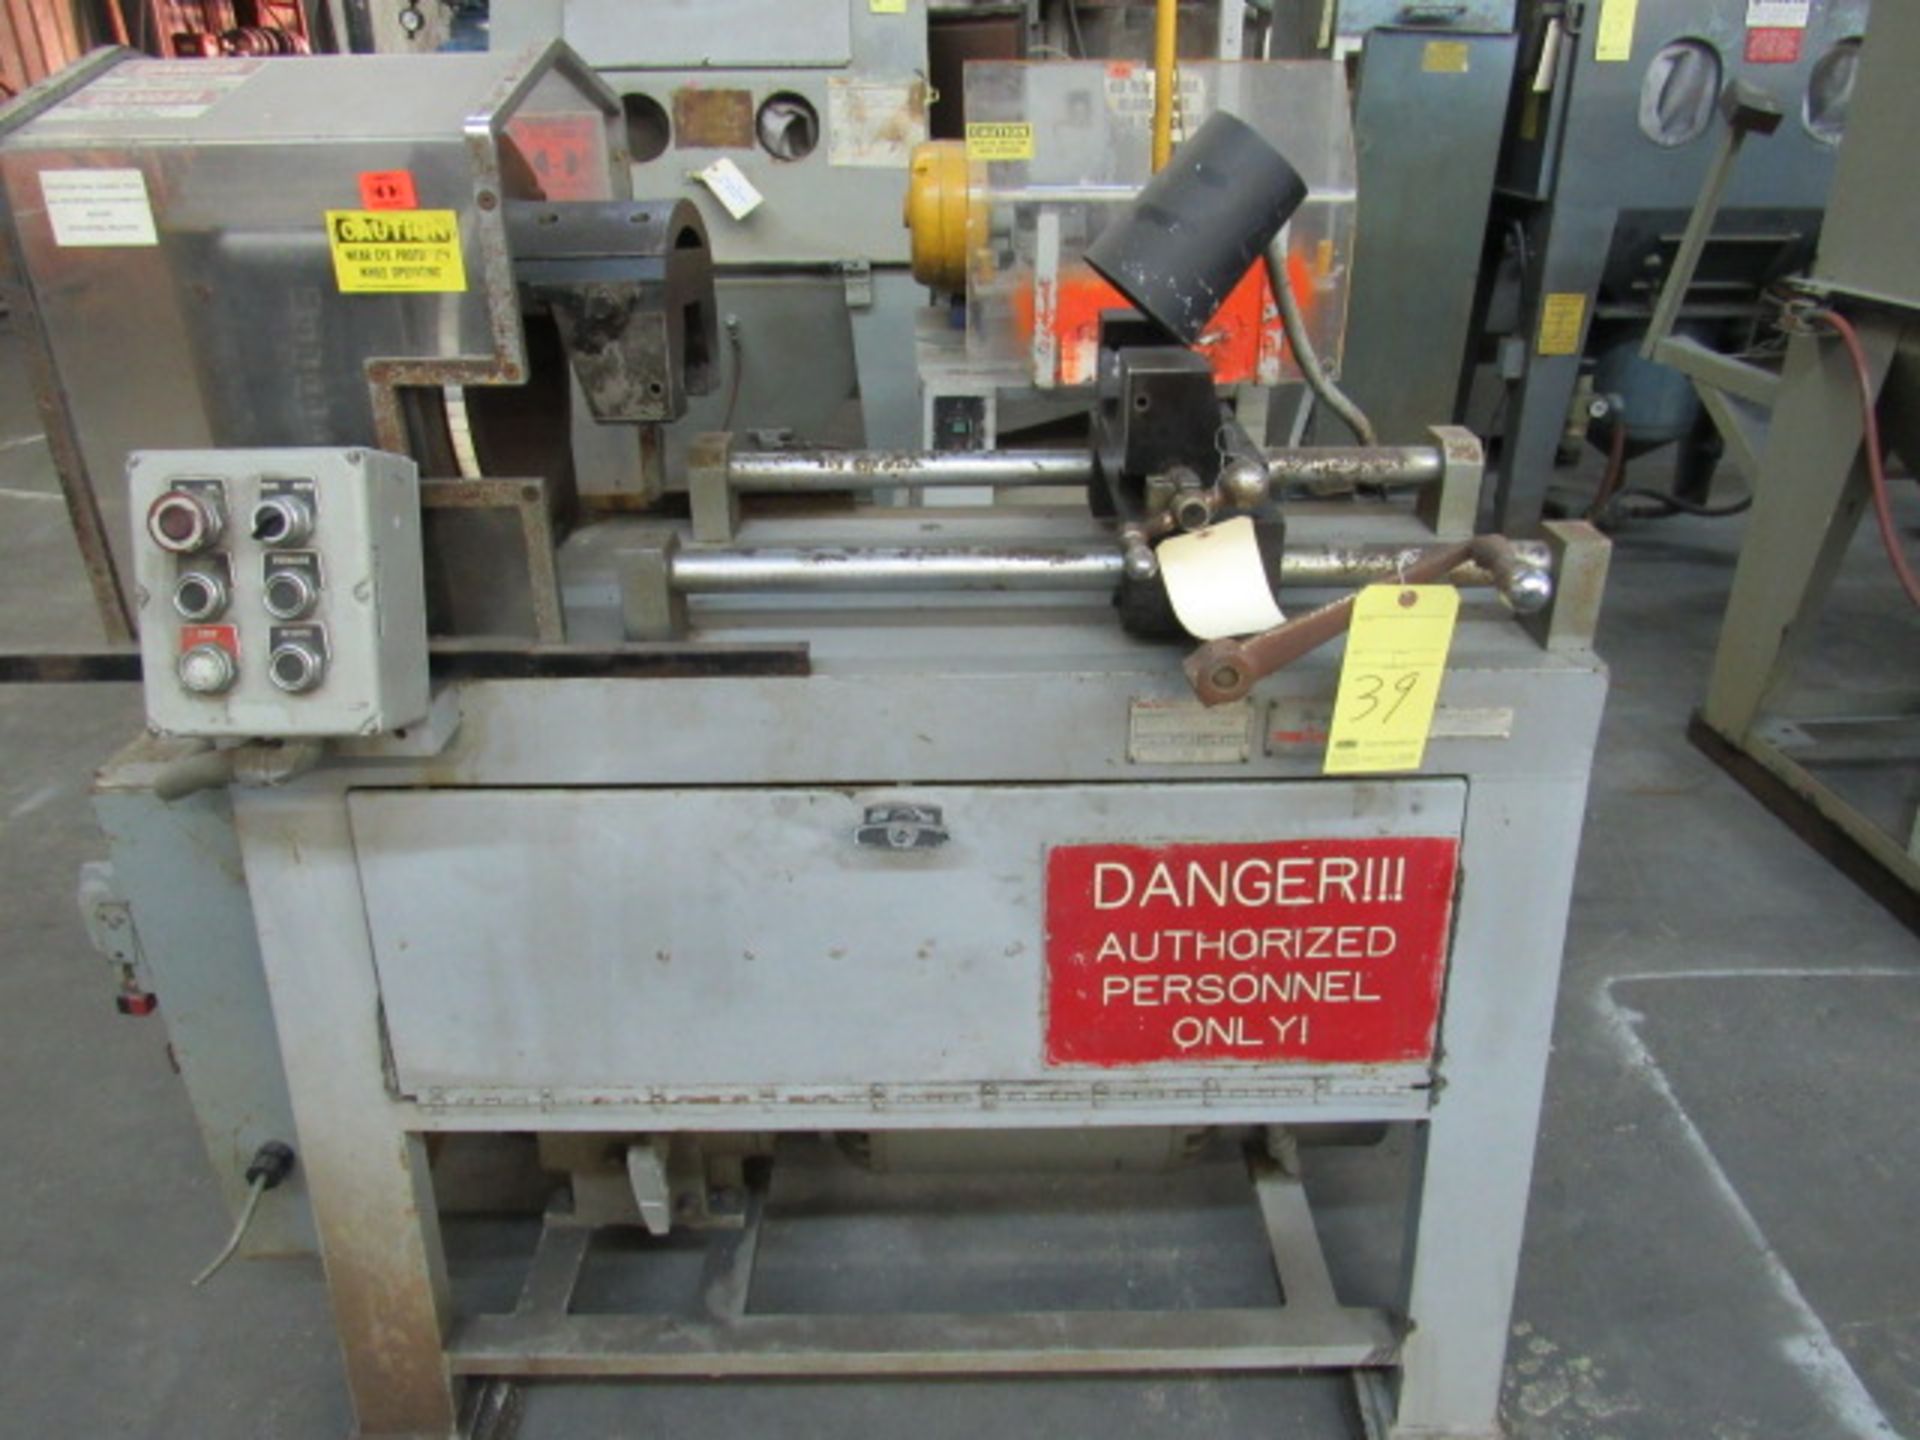 DOG-LEG HOSE ASSEMBLY MACHINE, AEROQUIP MDL. A, new 1985, 4” to 48” cap., large qty. of tooling &